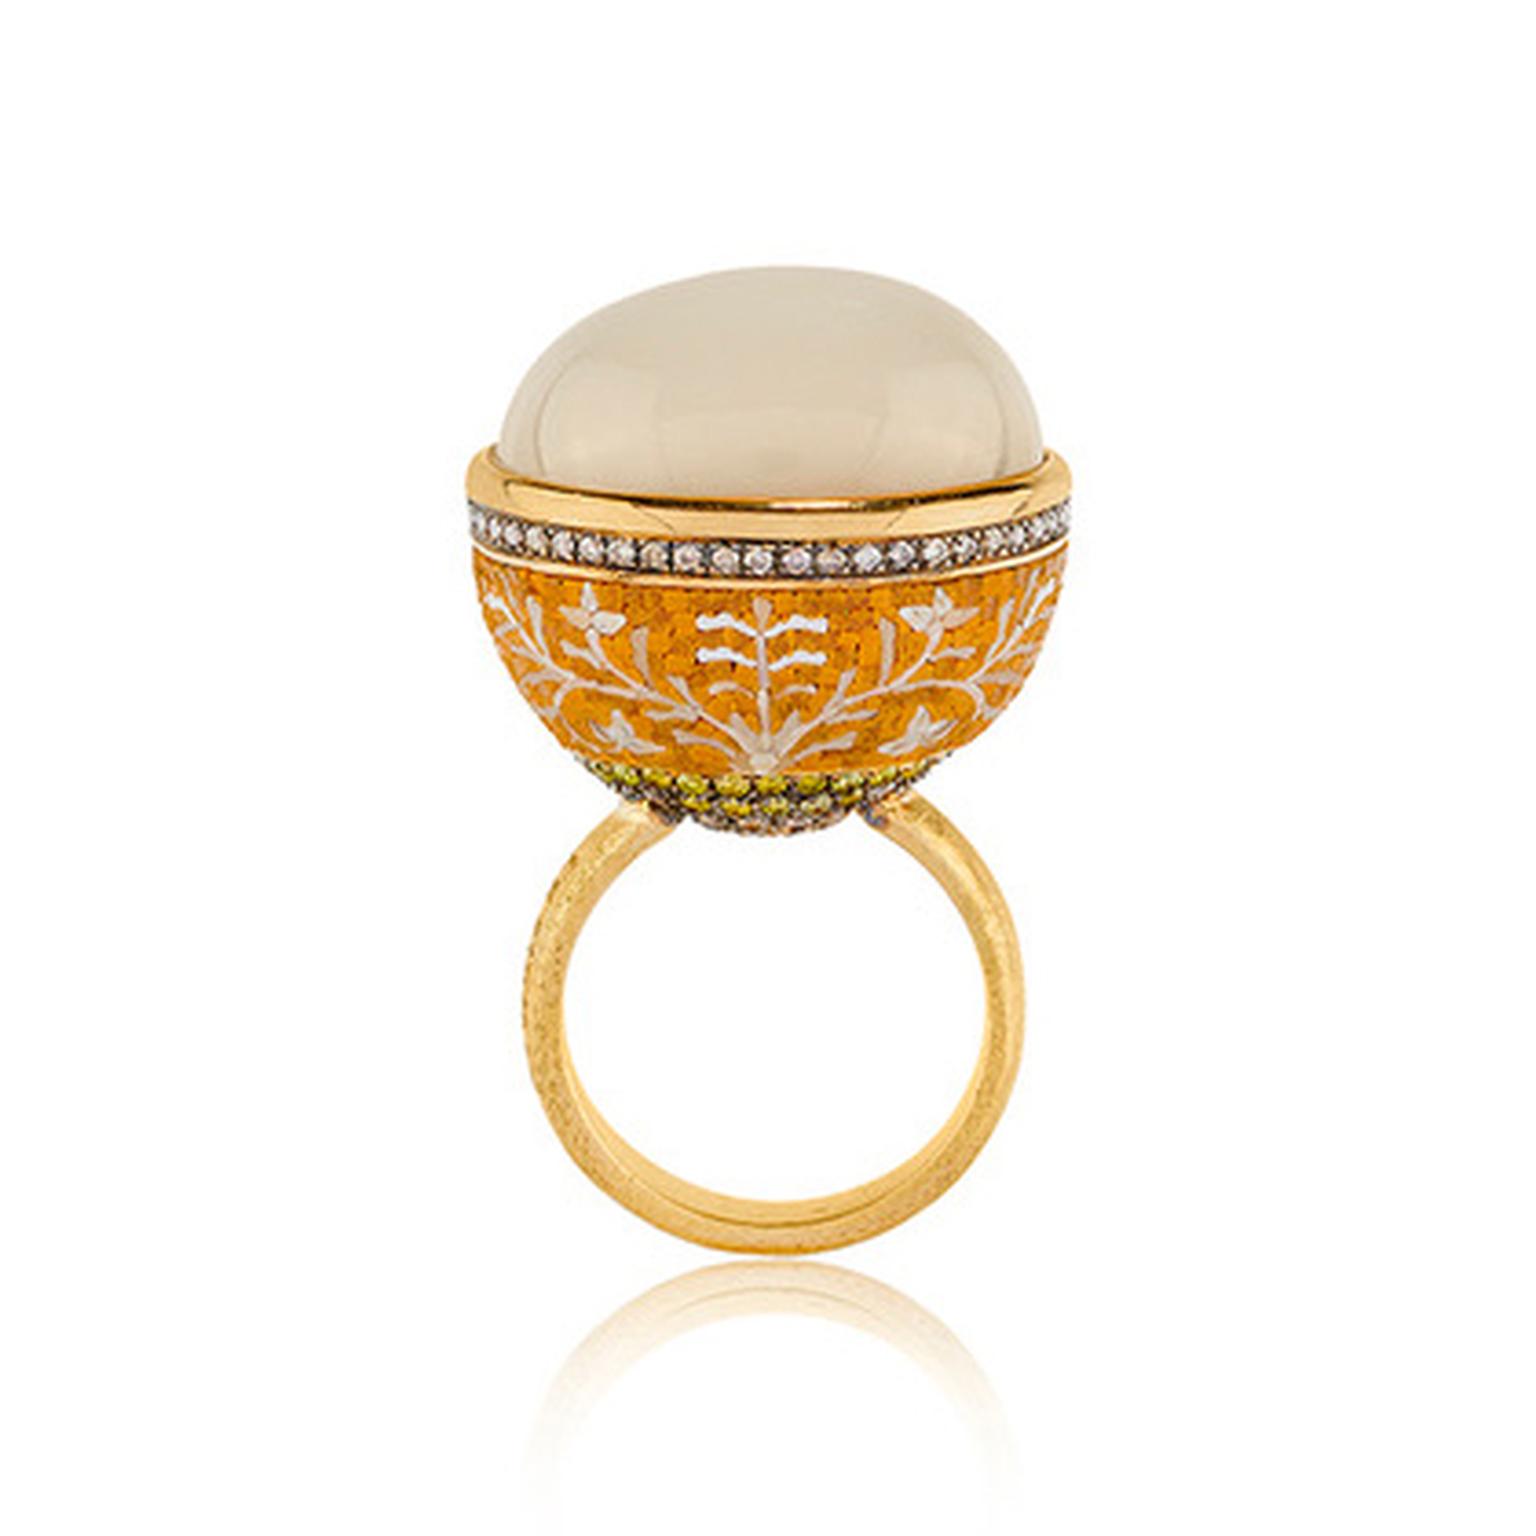 Boule ring by Le Sibille 